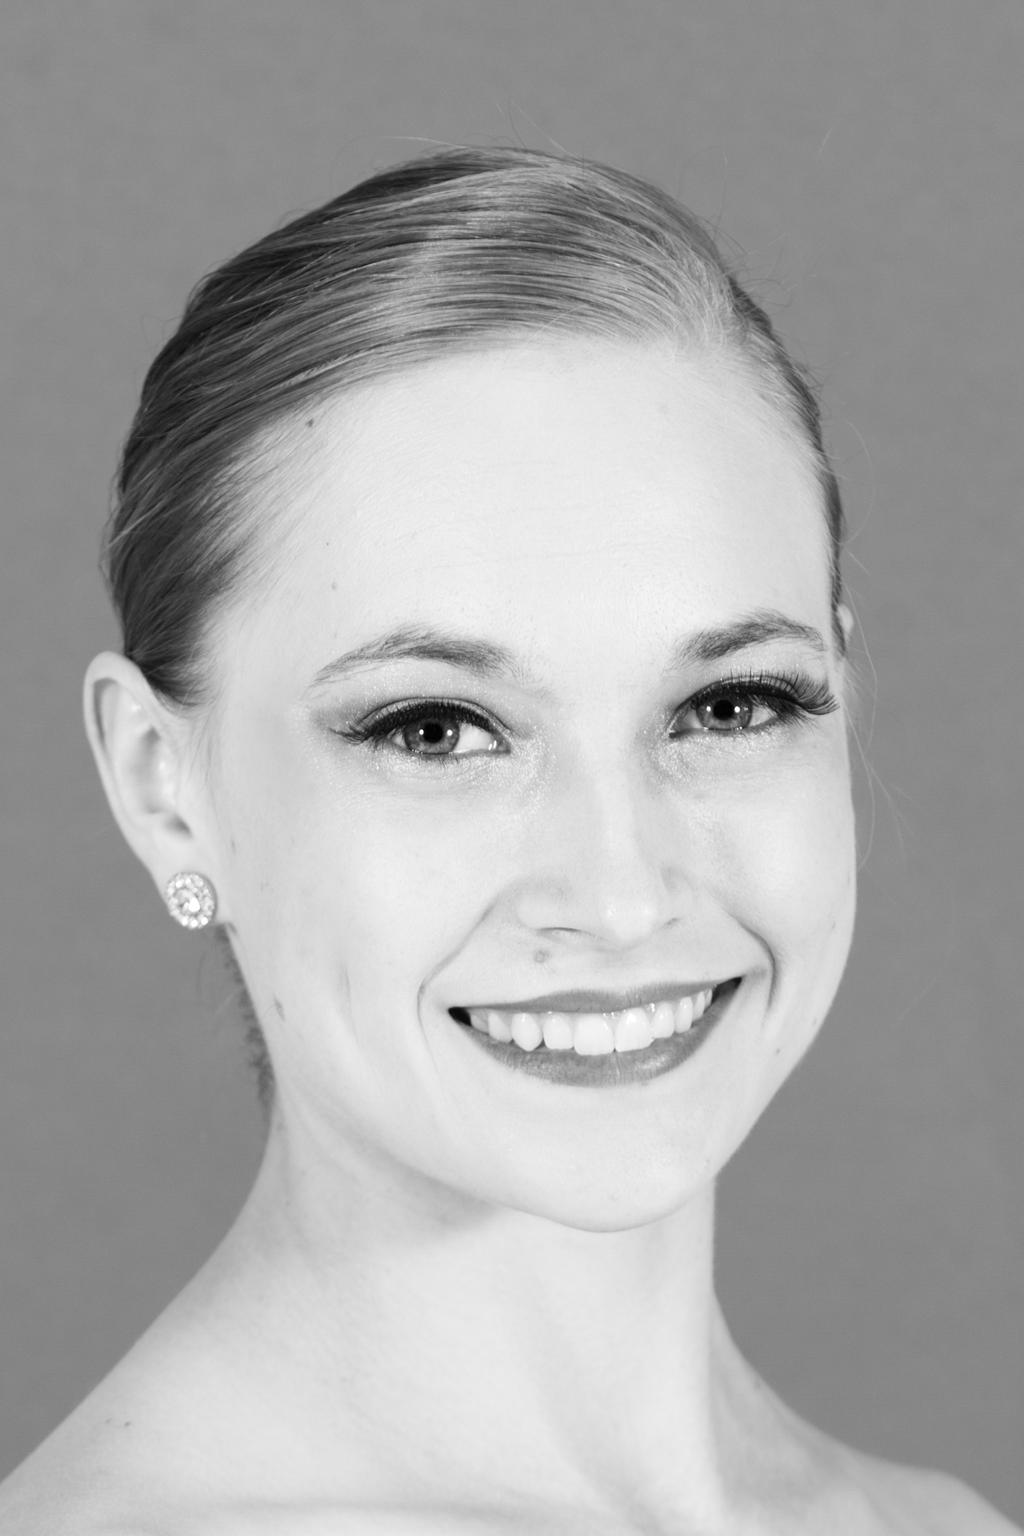 She danced with Greater Lansing Ballet, Ballet Magnificat and as a freelance artist, teacher and choreographer in the Chicago area.